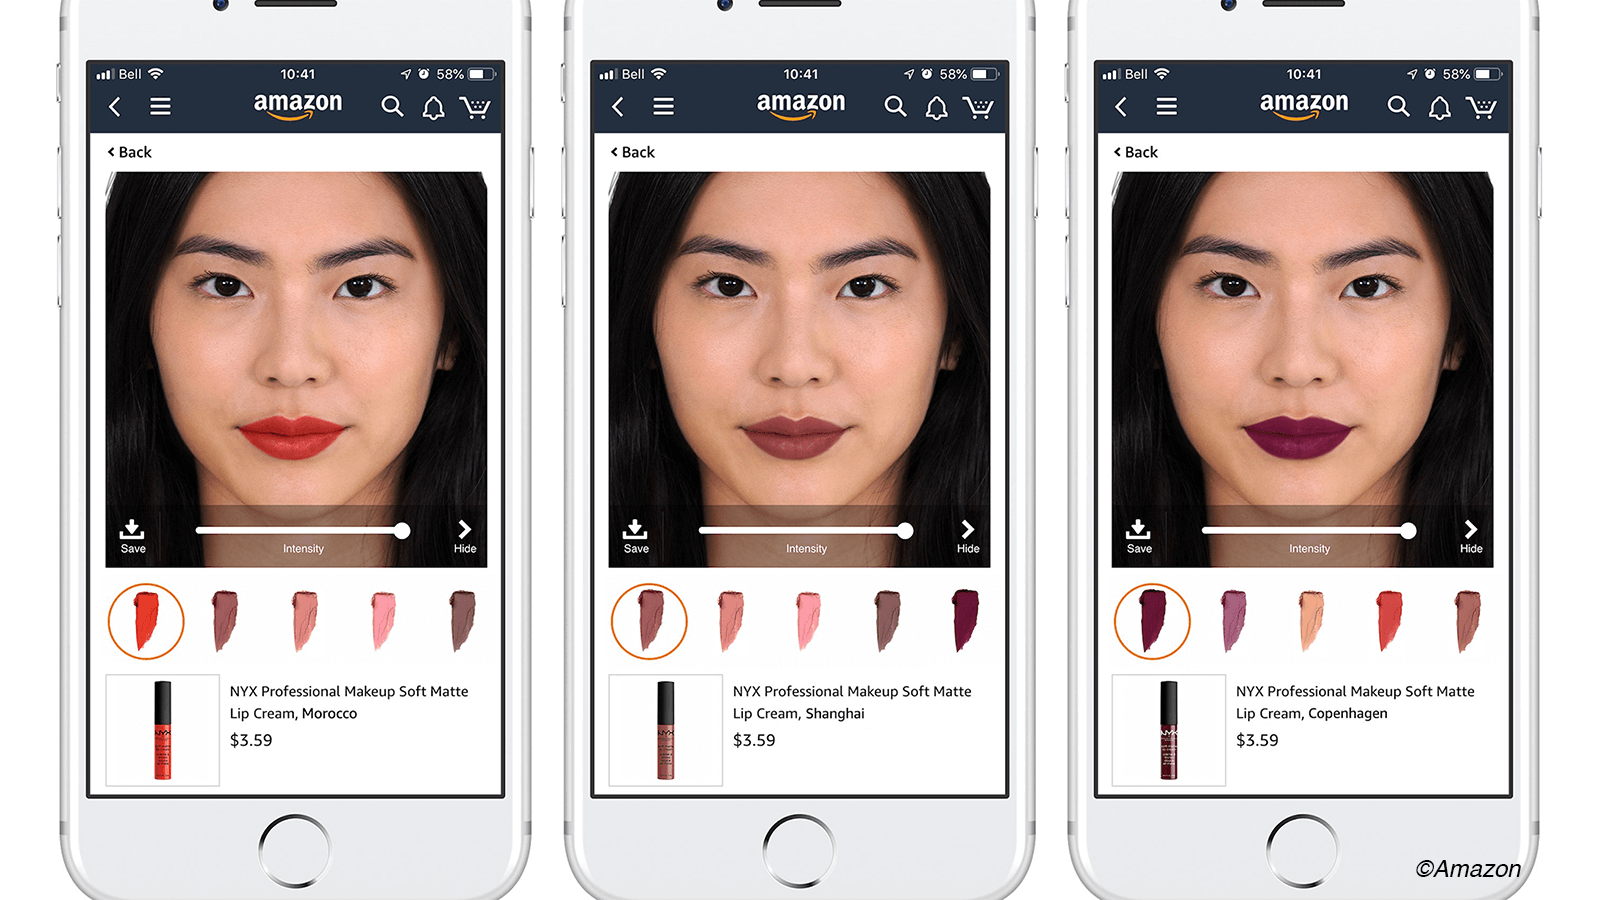 https://venturebeat.com/2019/06/04/amazon-and-loreal-let-you-digitally-try-on-makeup/